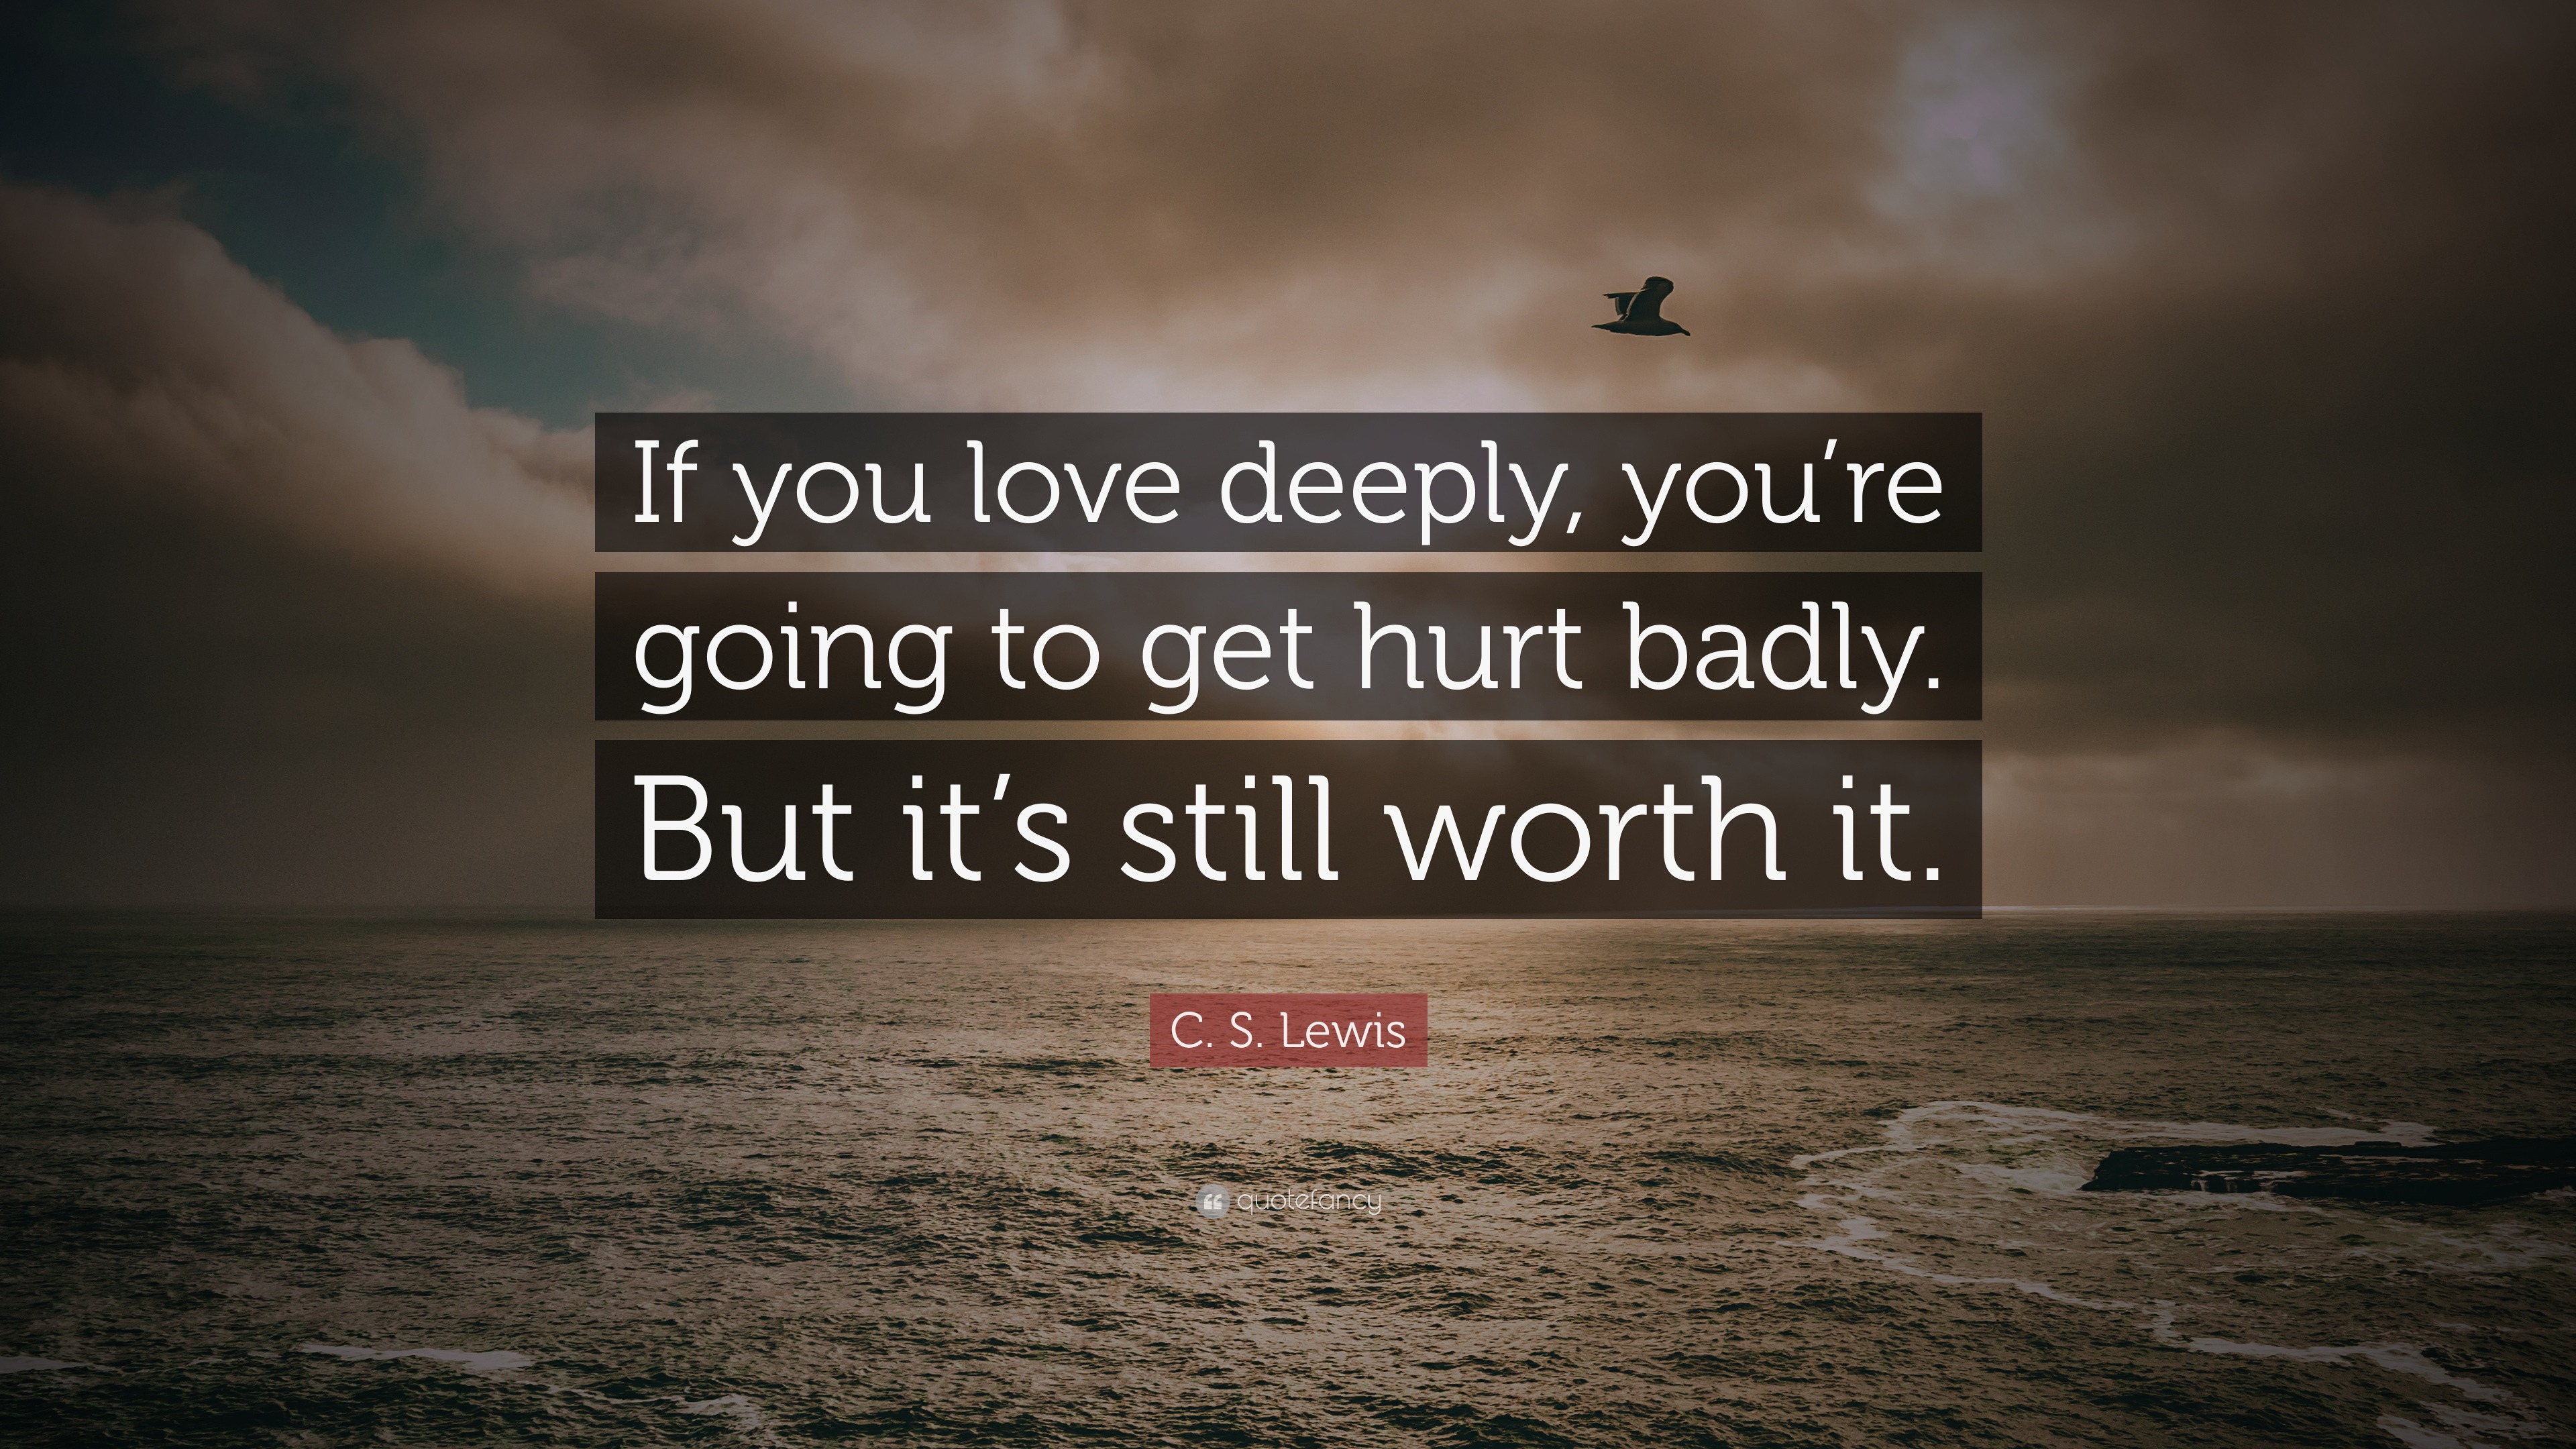 C S Lewis Quote “If you love deeply you re going to